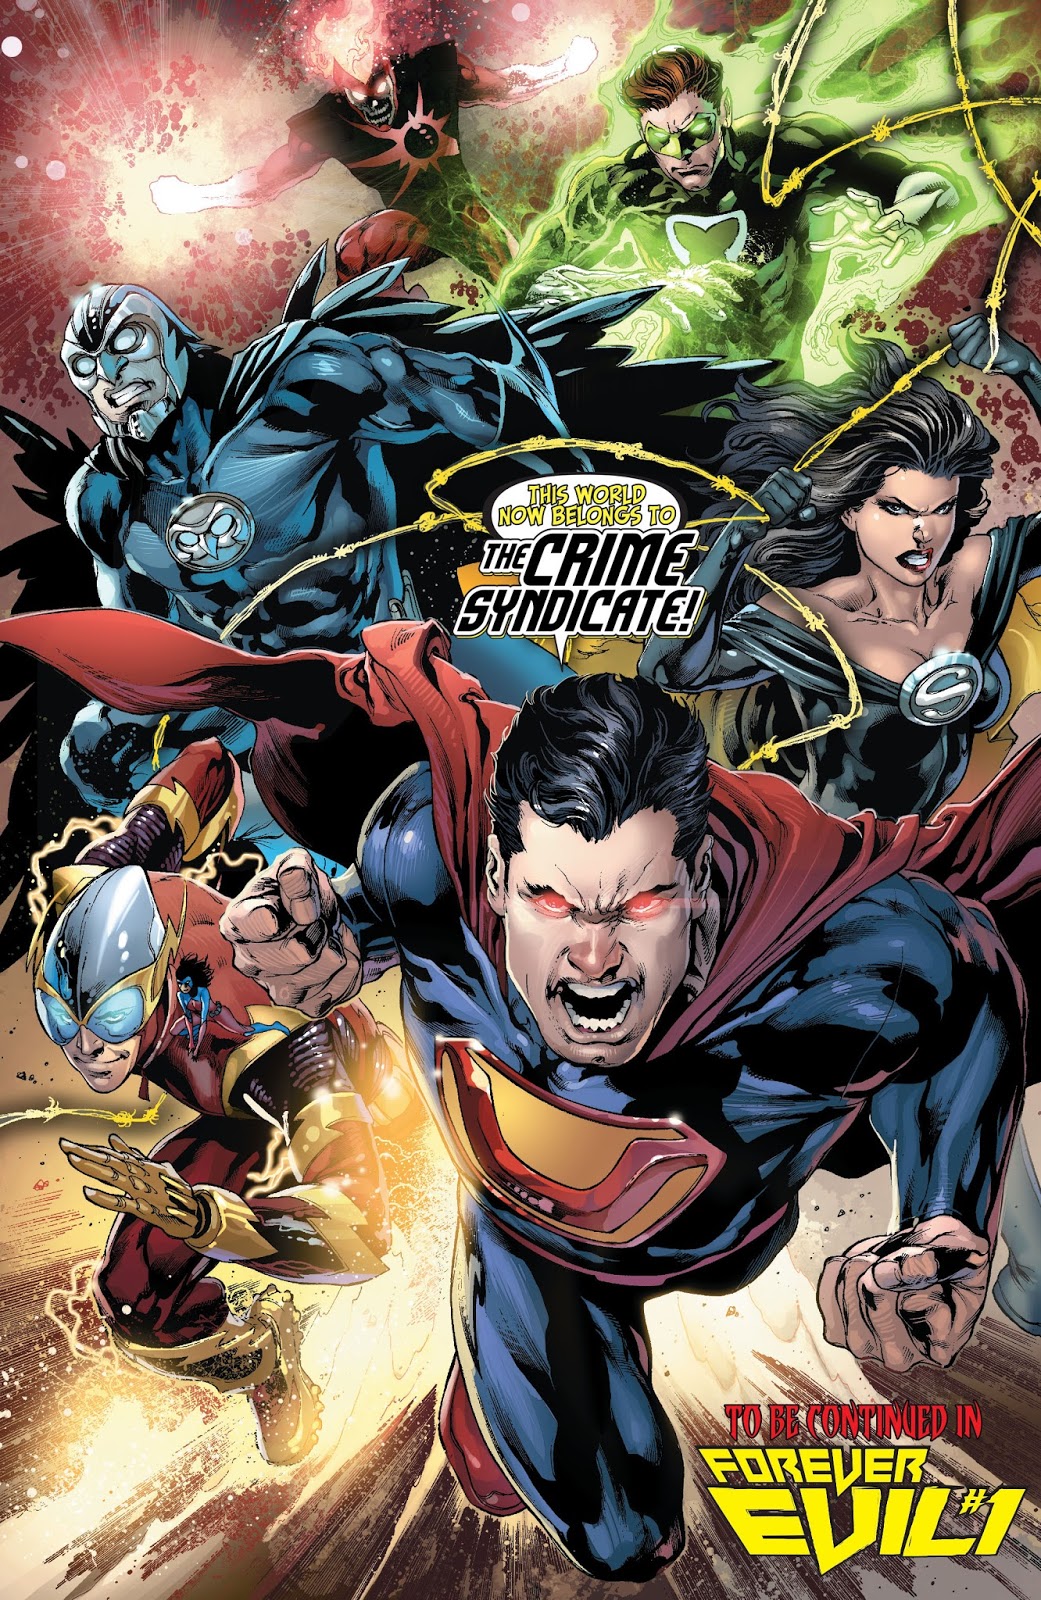 Crime Syndicate from Justice League #23 Trinity War part 6 by Ivan Reis, Joe Prado, and Rod Reis